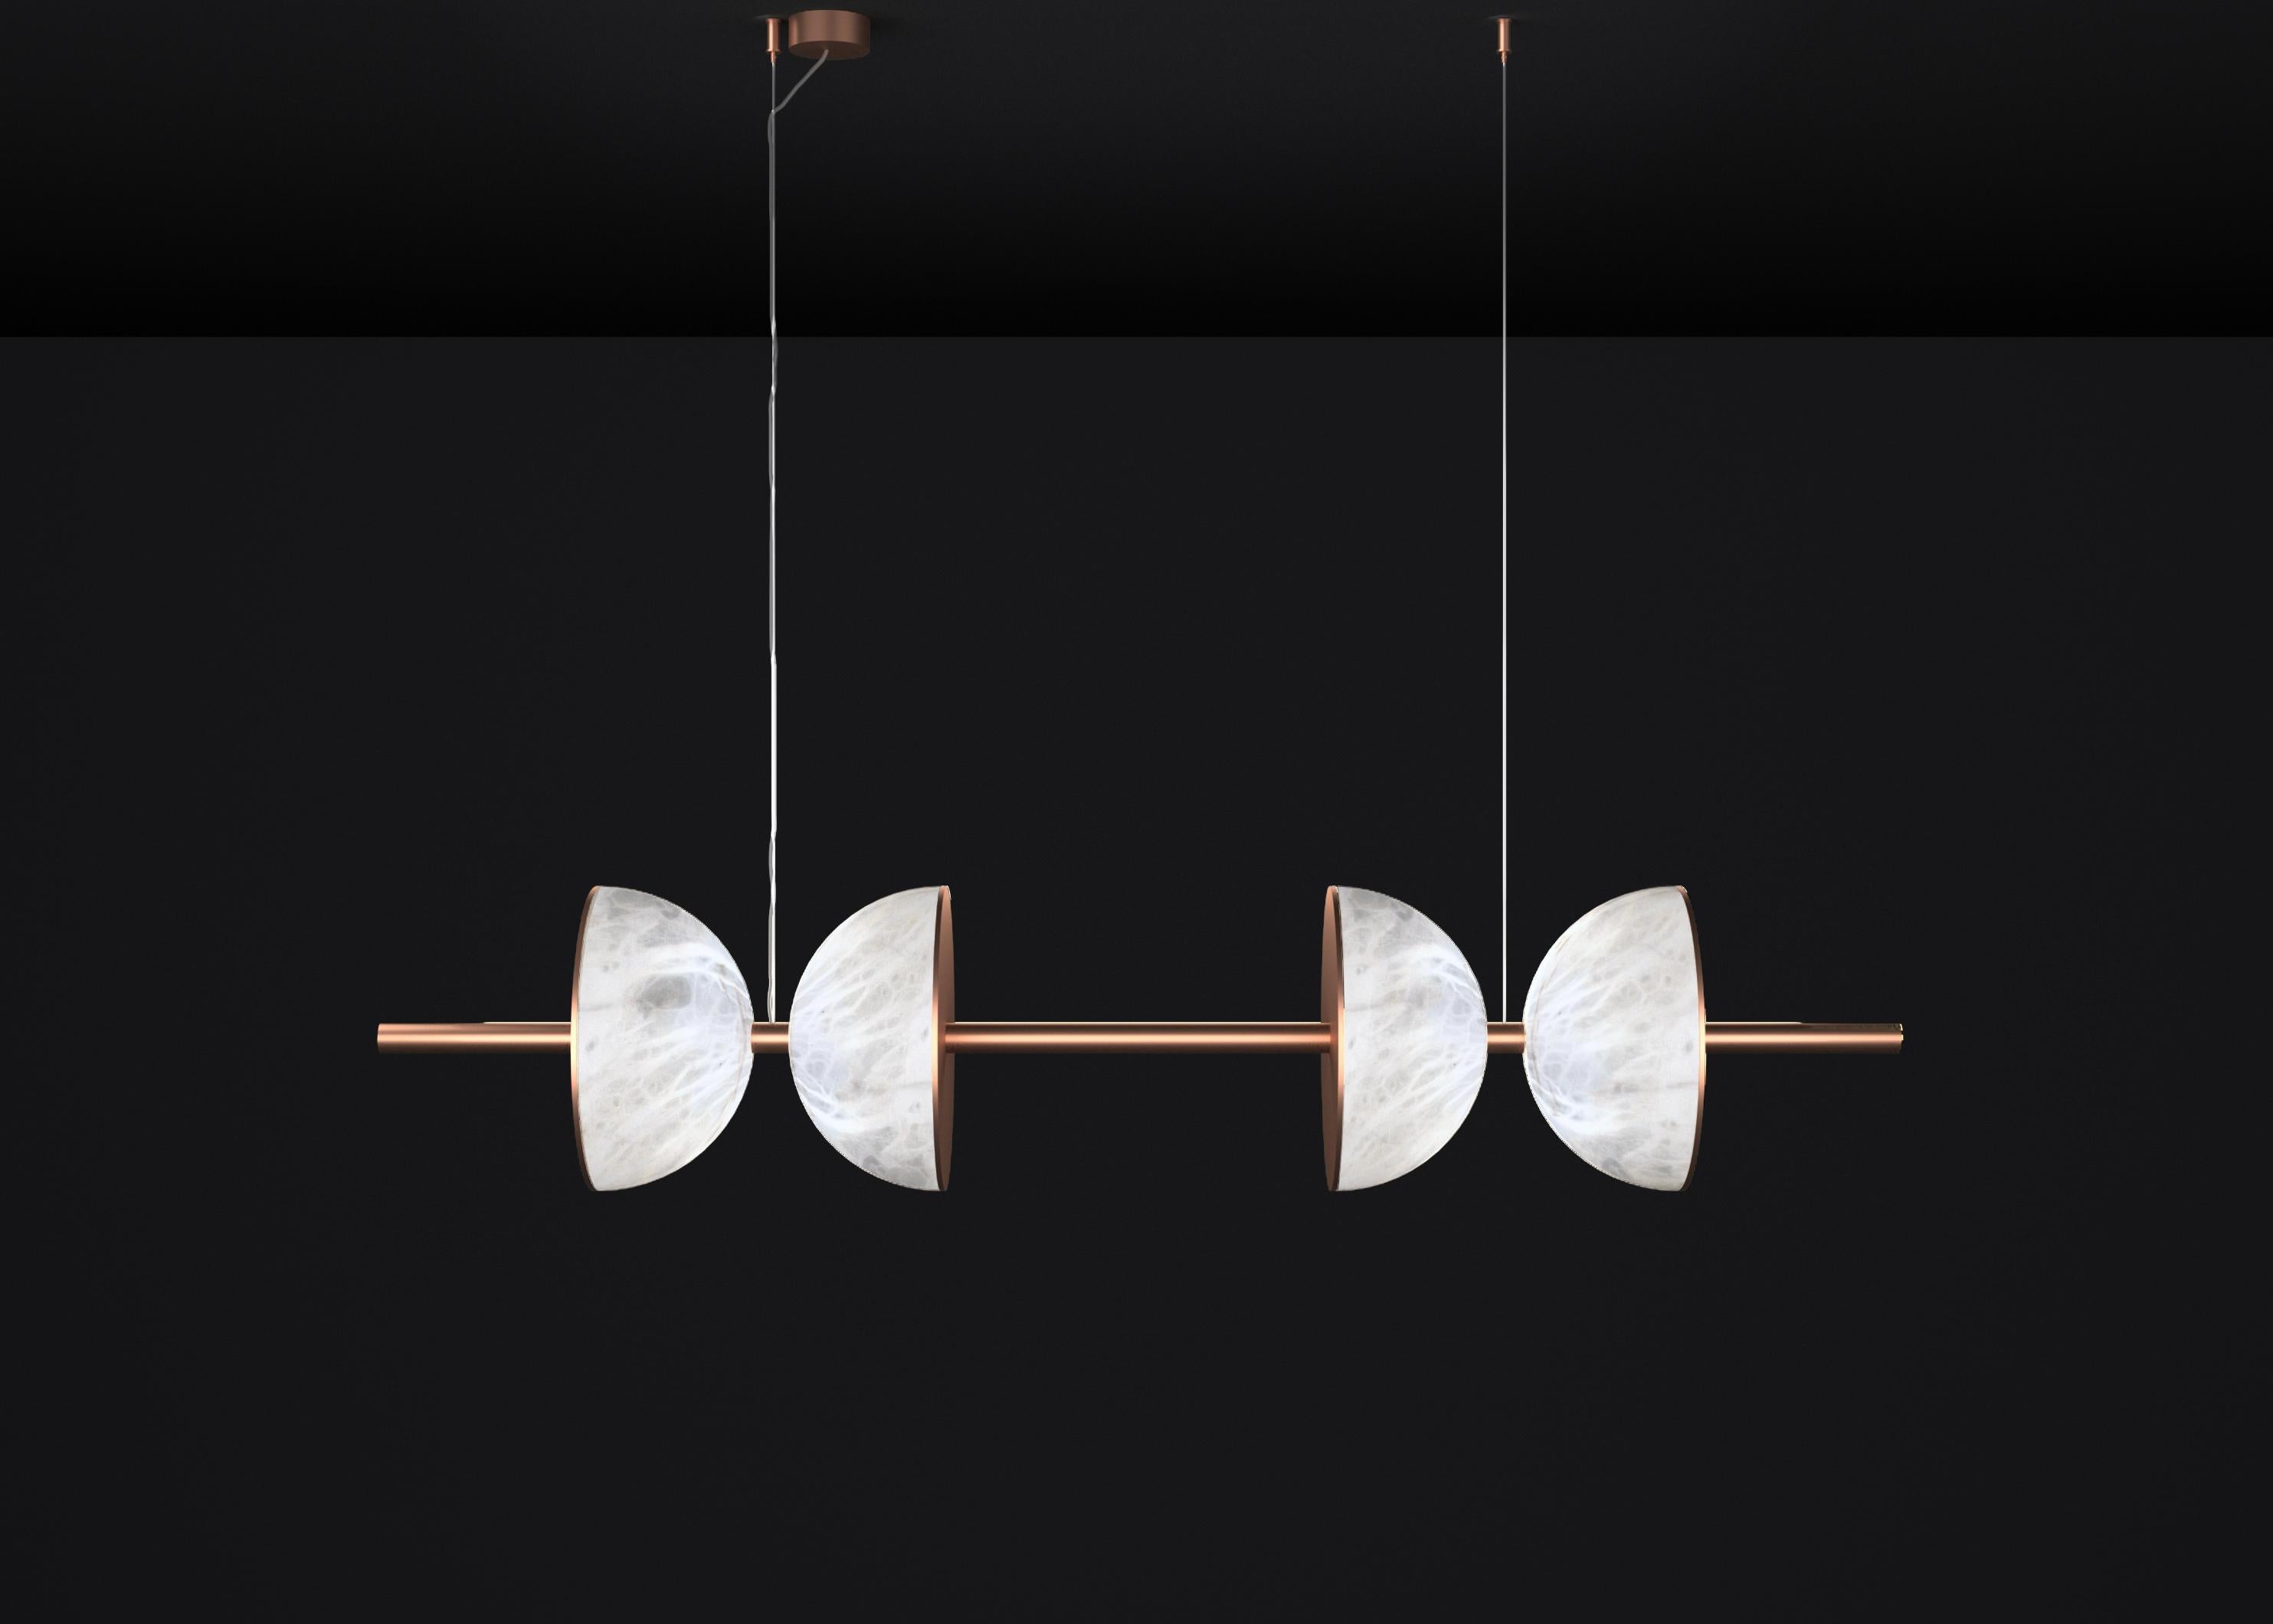 Ermes Copper And Alabaster Pendant Light 2 by Alabastro Italiano
Dimensions: D 30 x W 150 x H 300 cm.
Materials: White alabaster and copper.

Available in different finishes: Shiny Silver, Bronze, Brushed Brass, Ruggine of Florence, Brushed